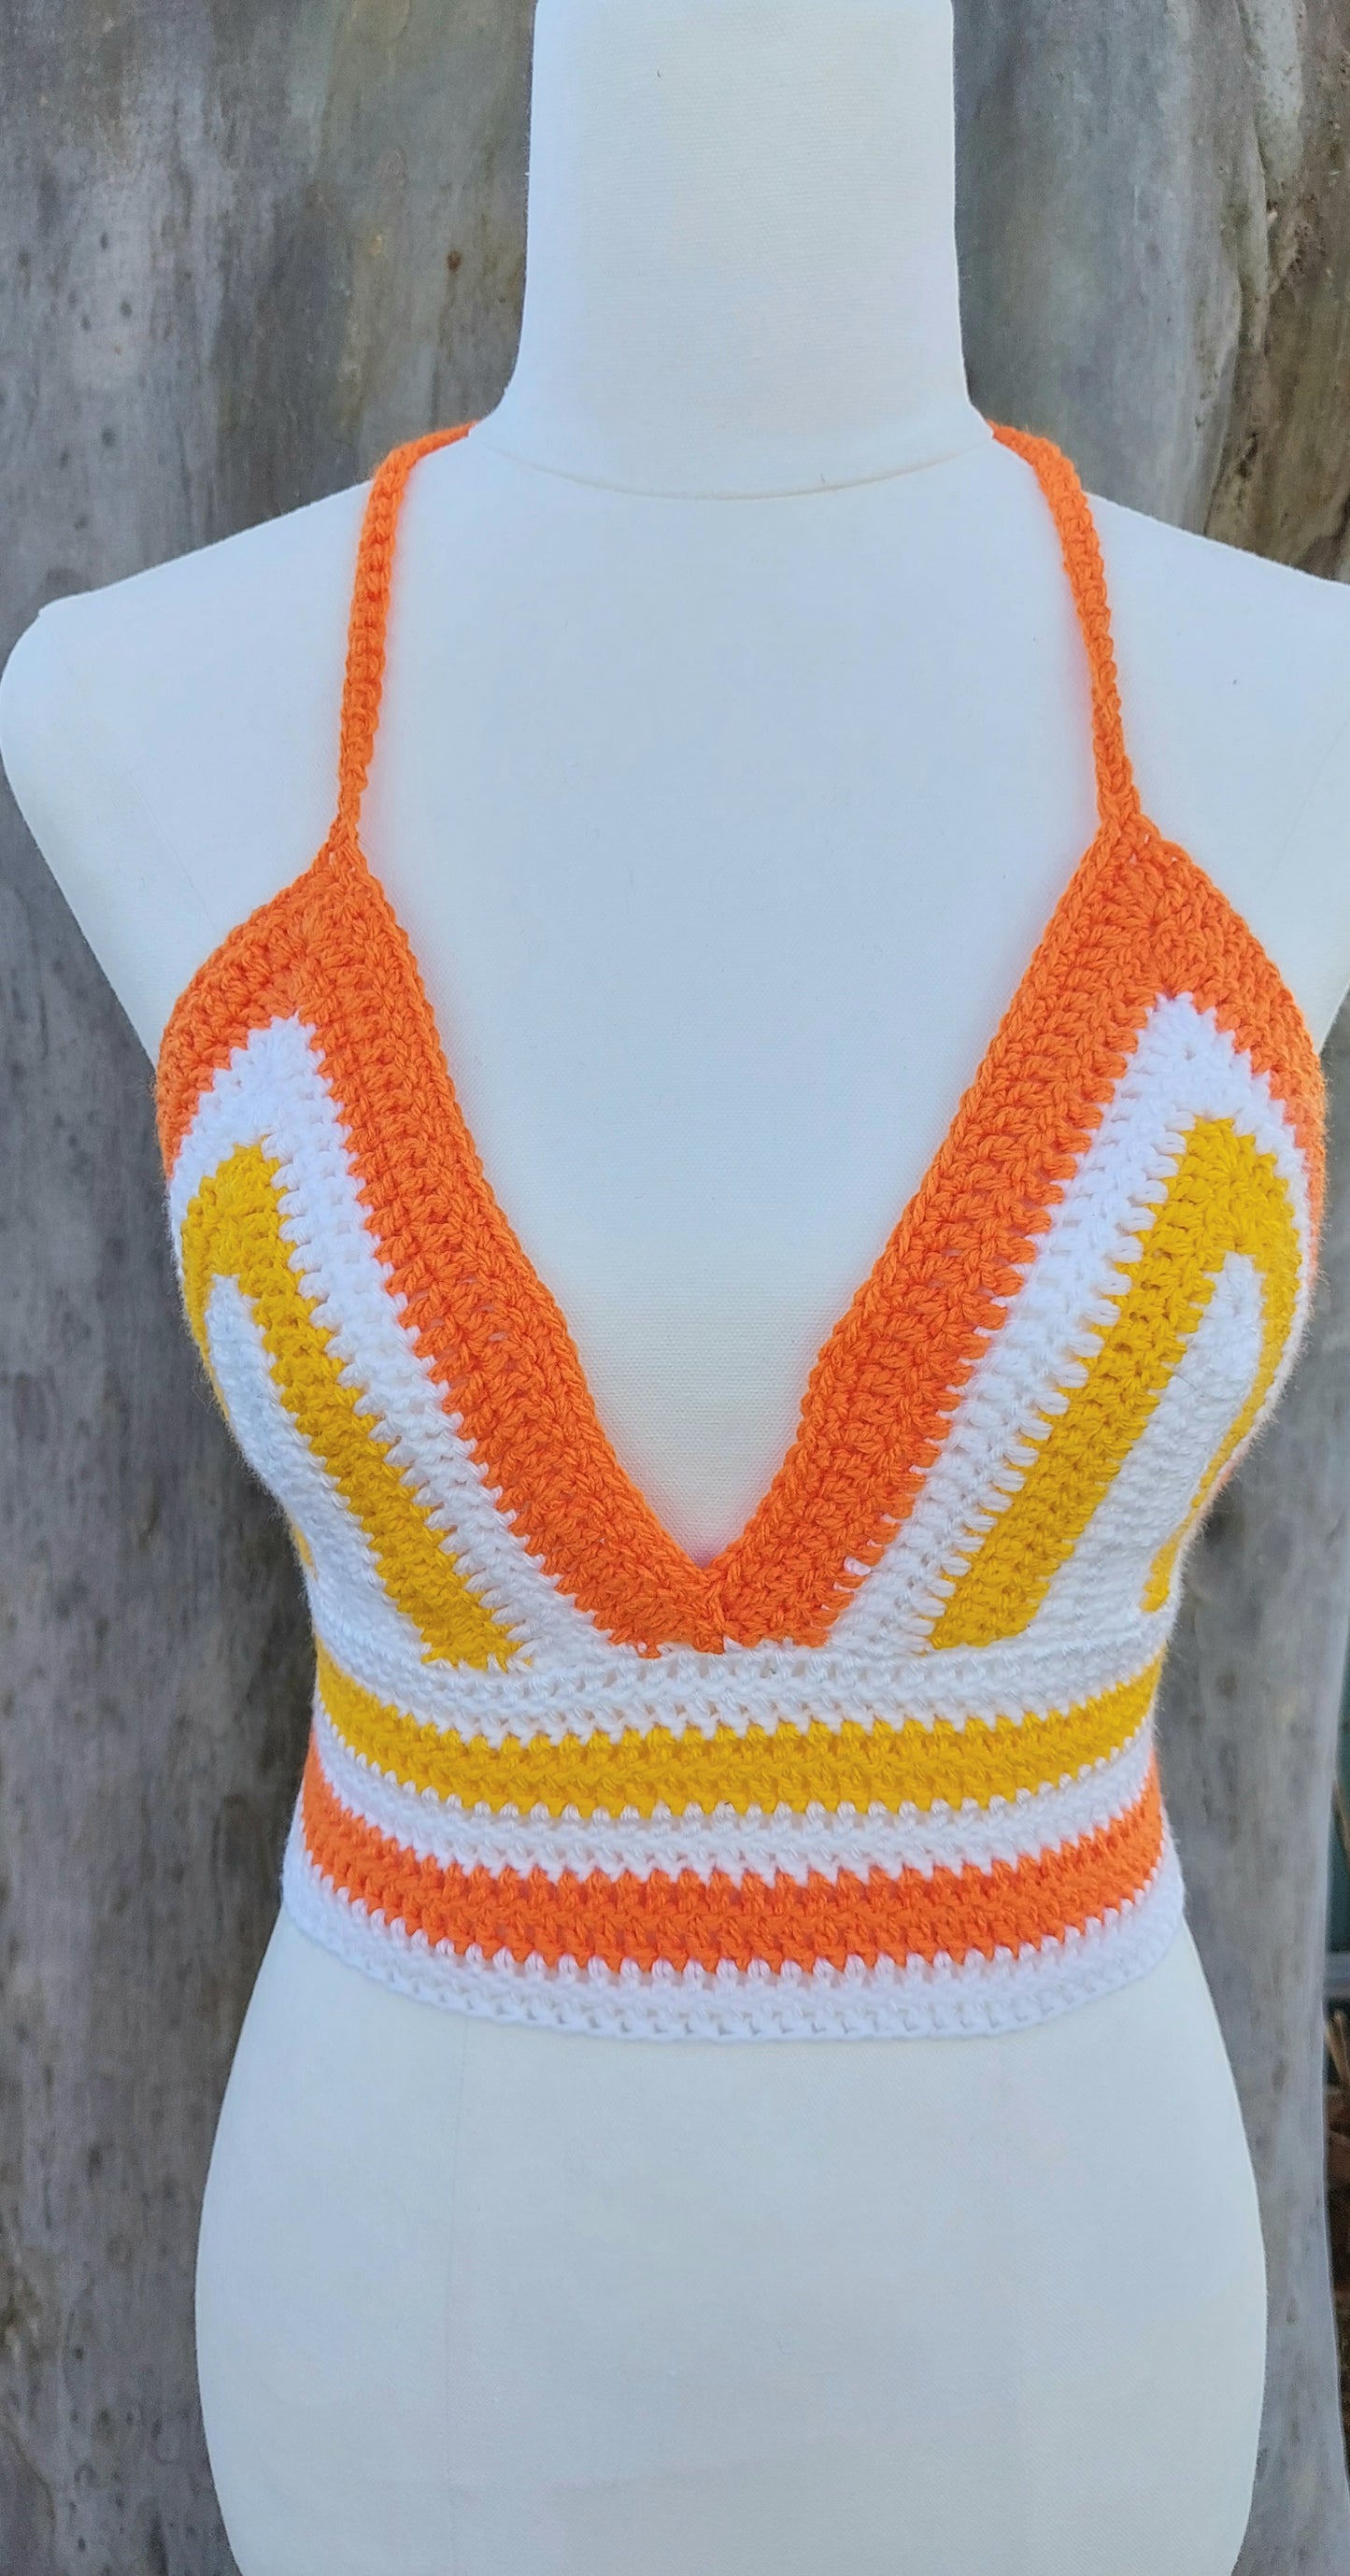 Youth Crochet Top